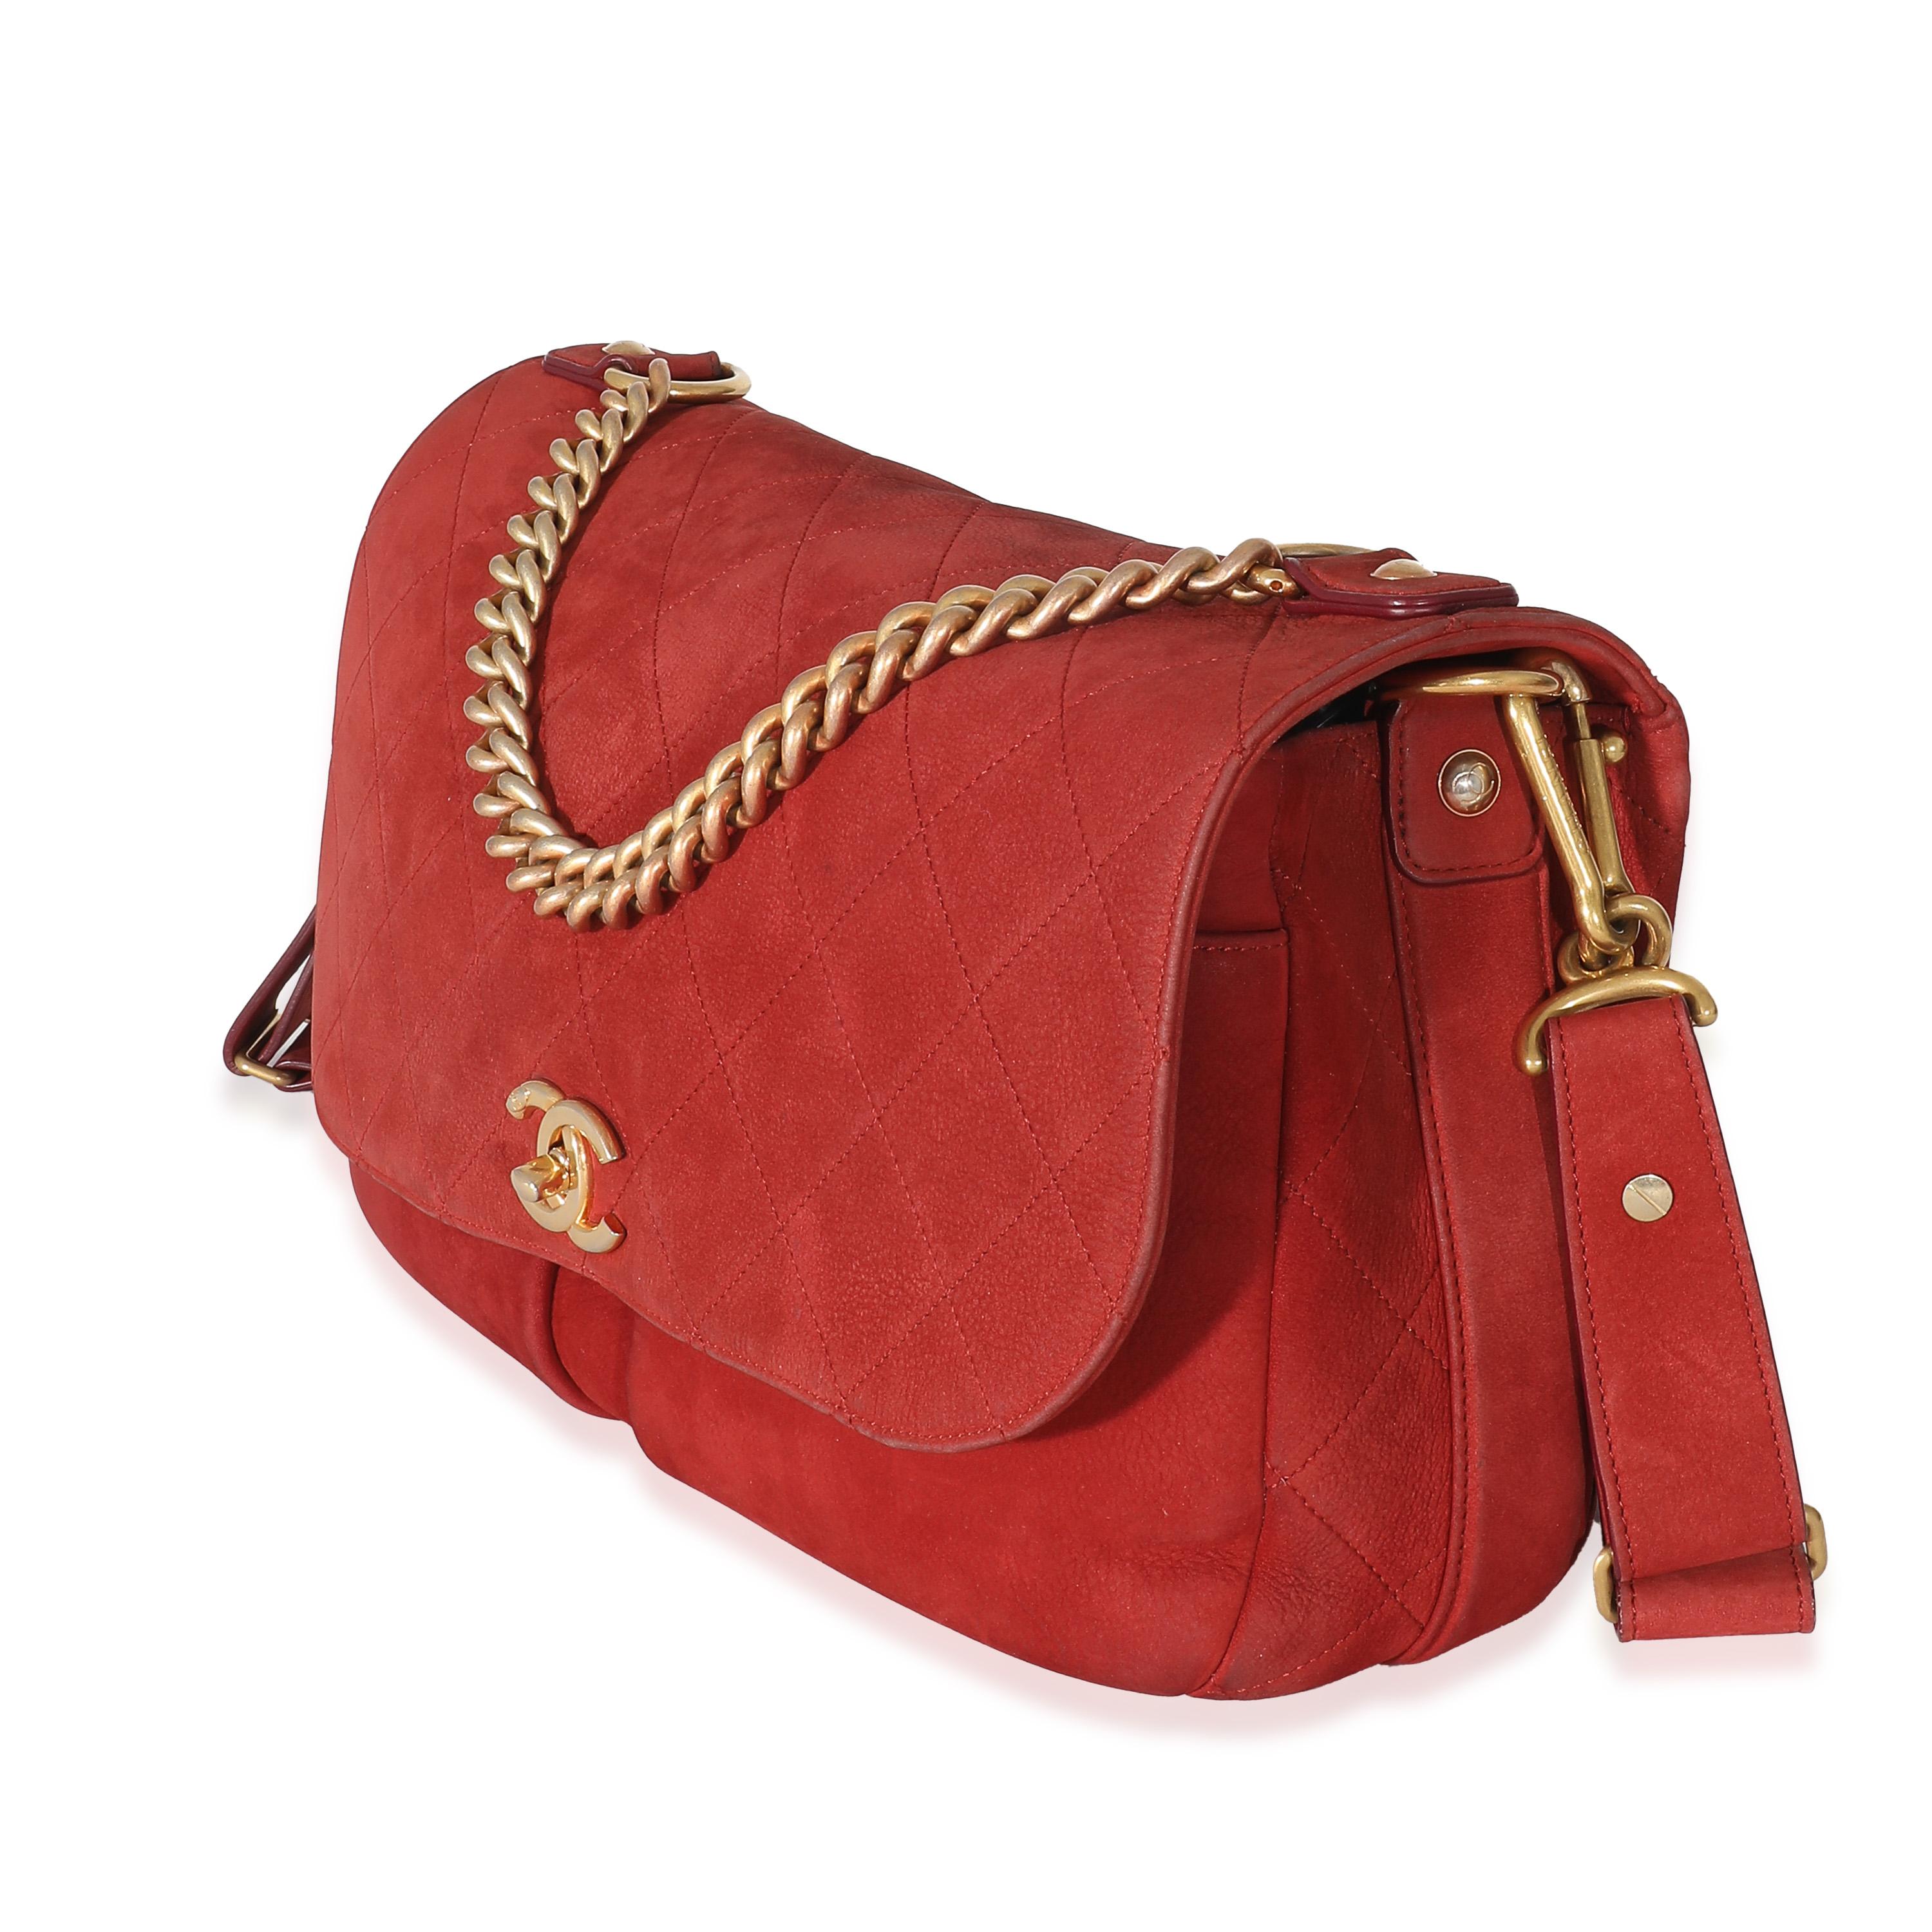 Chanel Red Suede Paris In Rome Messenger Bag In Excellent Condition For Sale In New York, NY